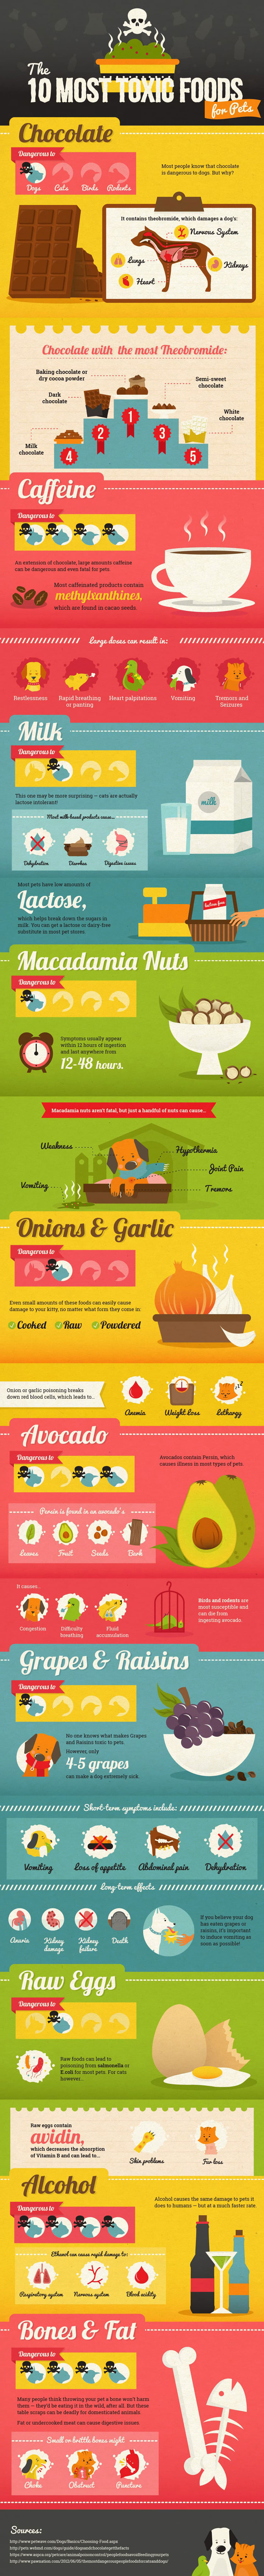 Toxic foods for pets